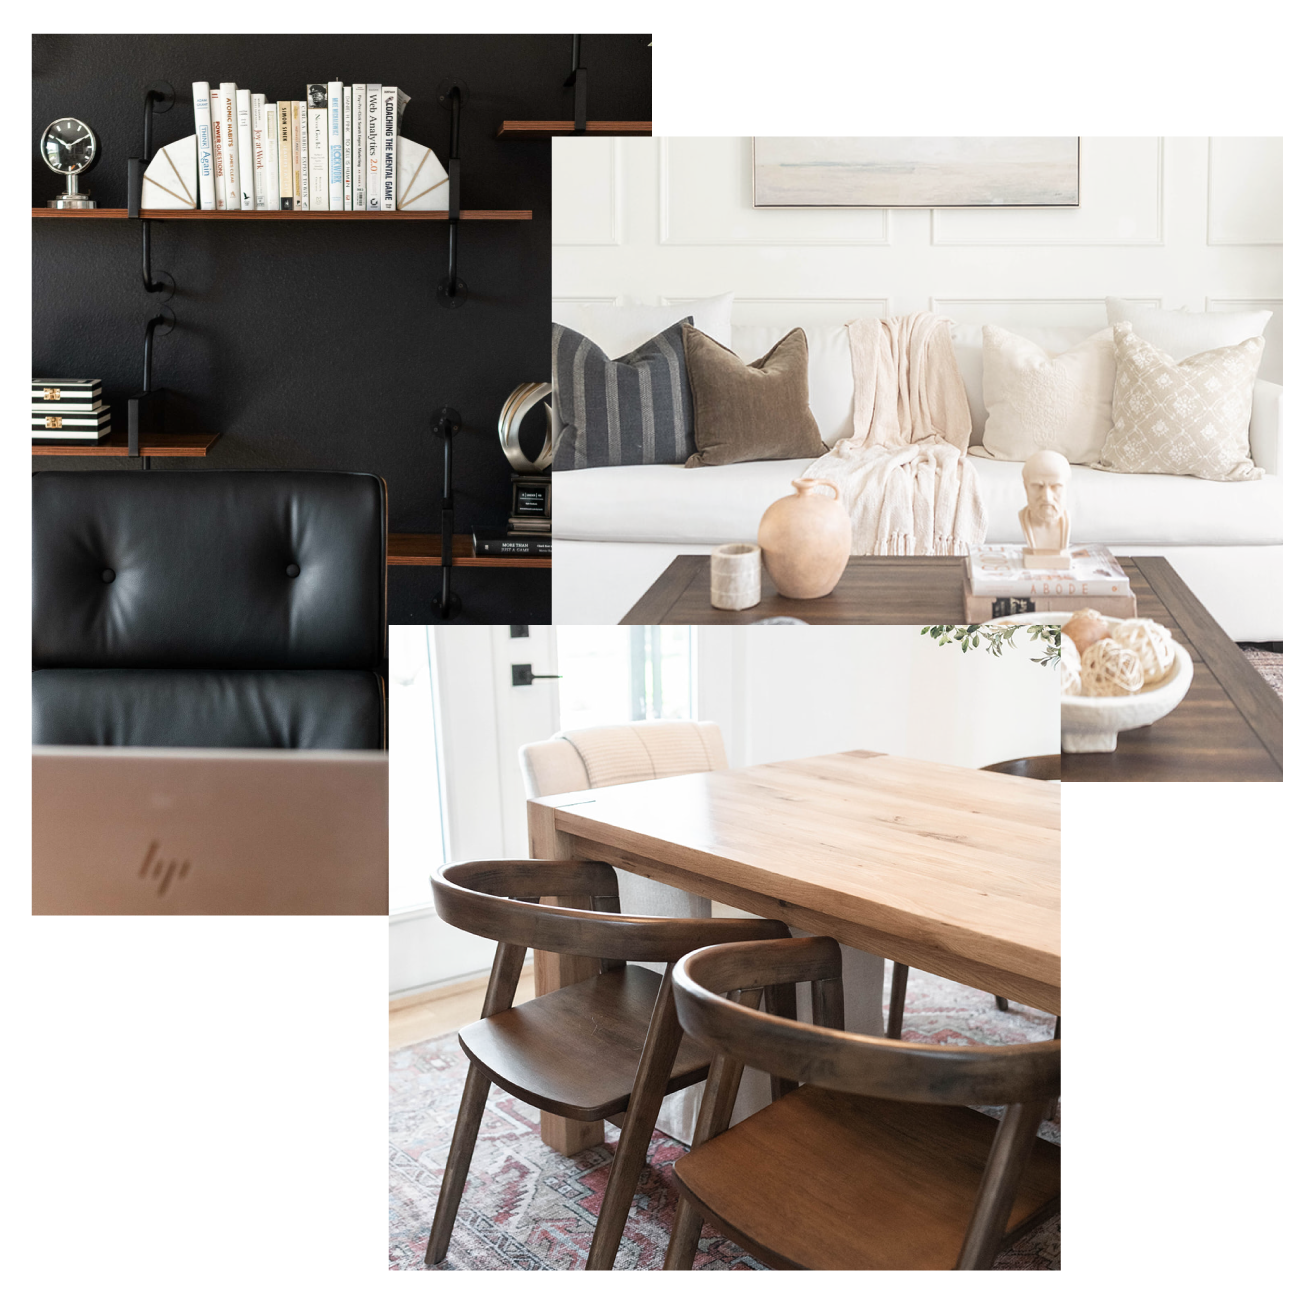 Black wall studio with wood shelves and black metal holding shapes and black desk chair - White sofa with light and dark cushions next to dark wood coffee table - Wood dining table and wood chairs on top of red and grey carpet